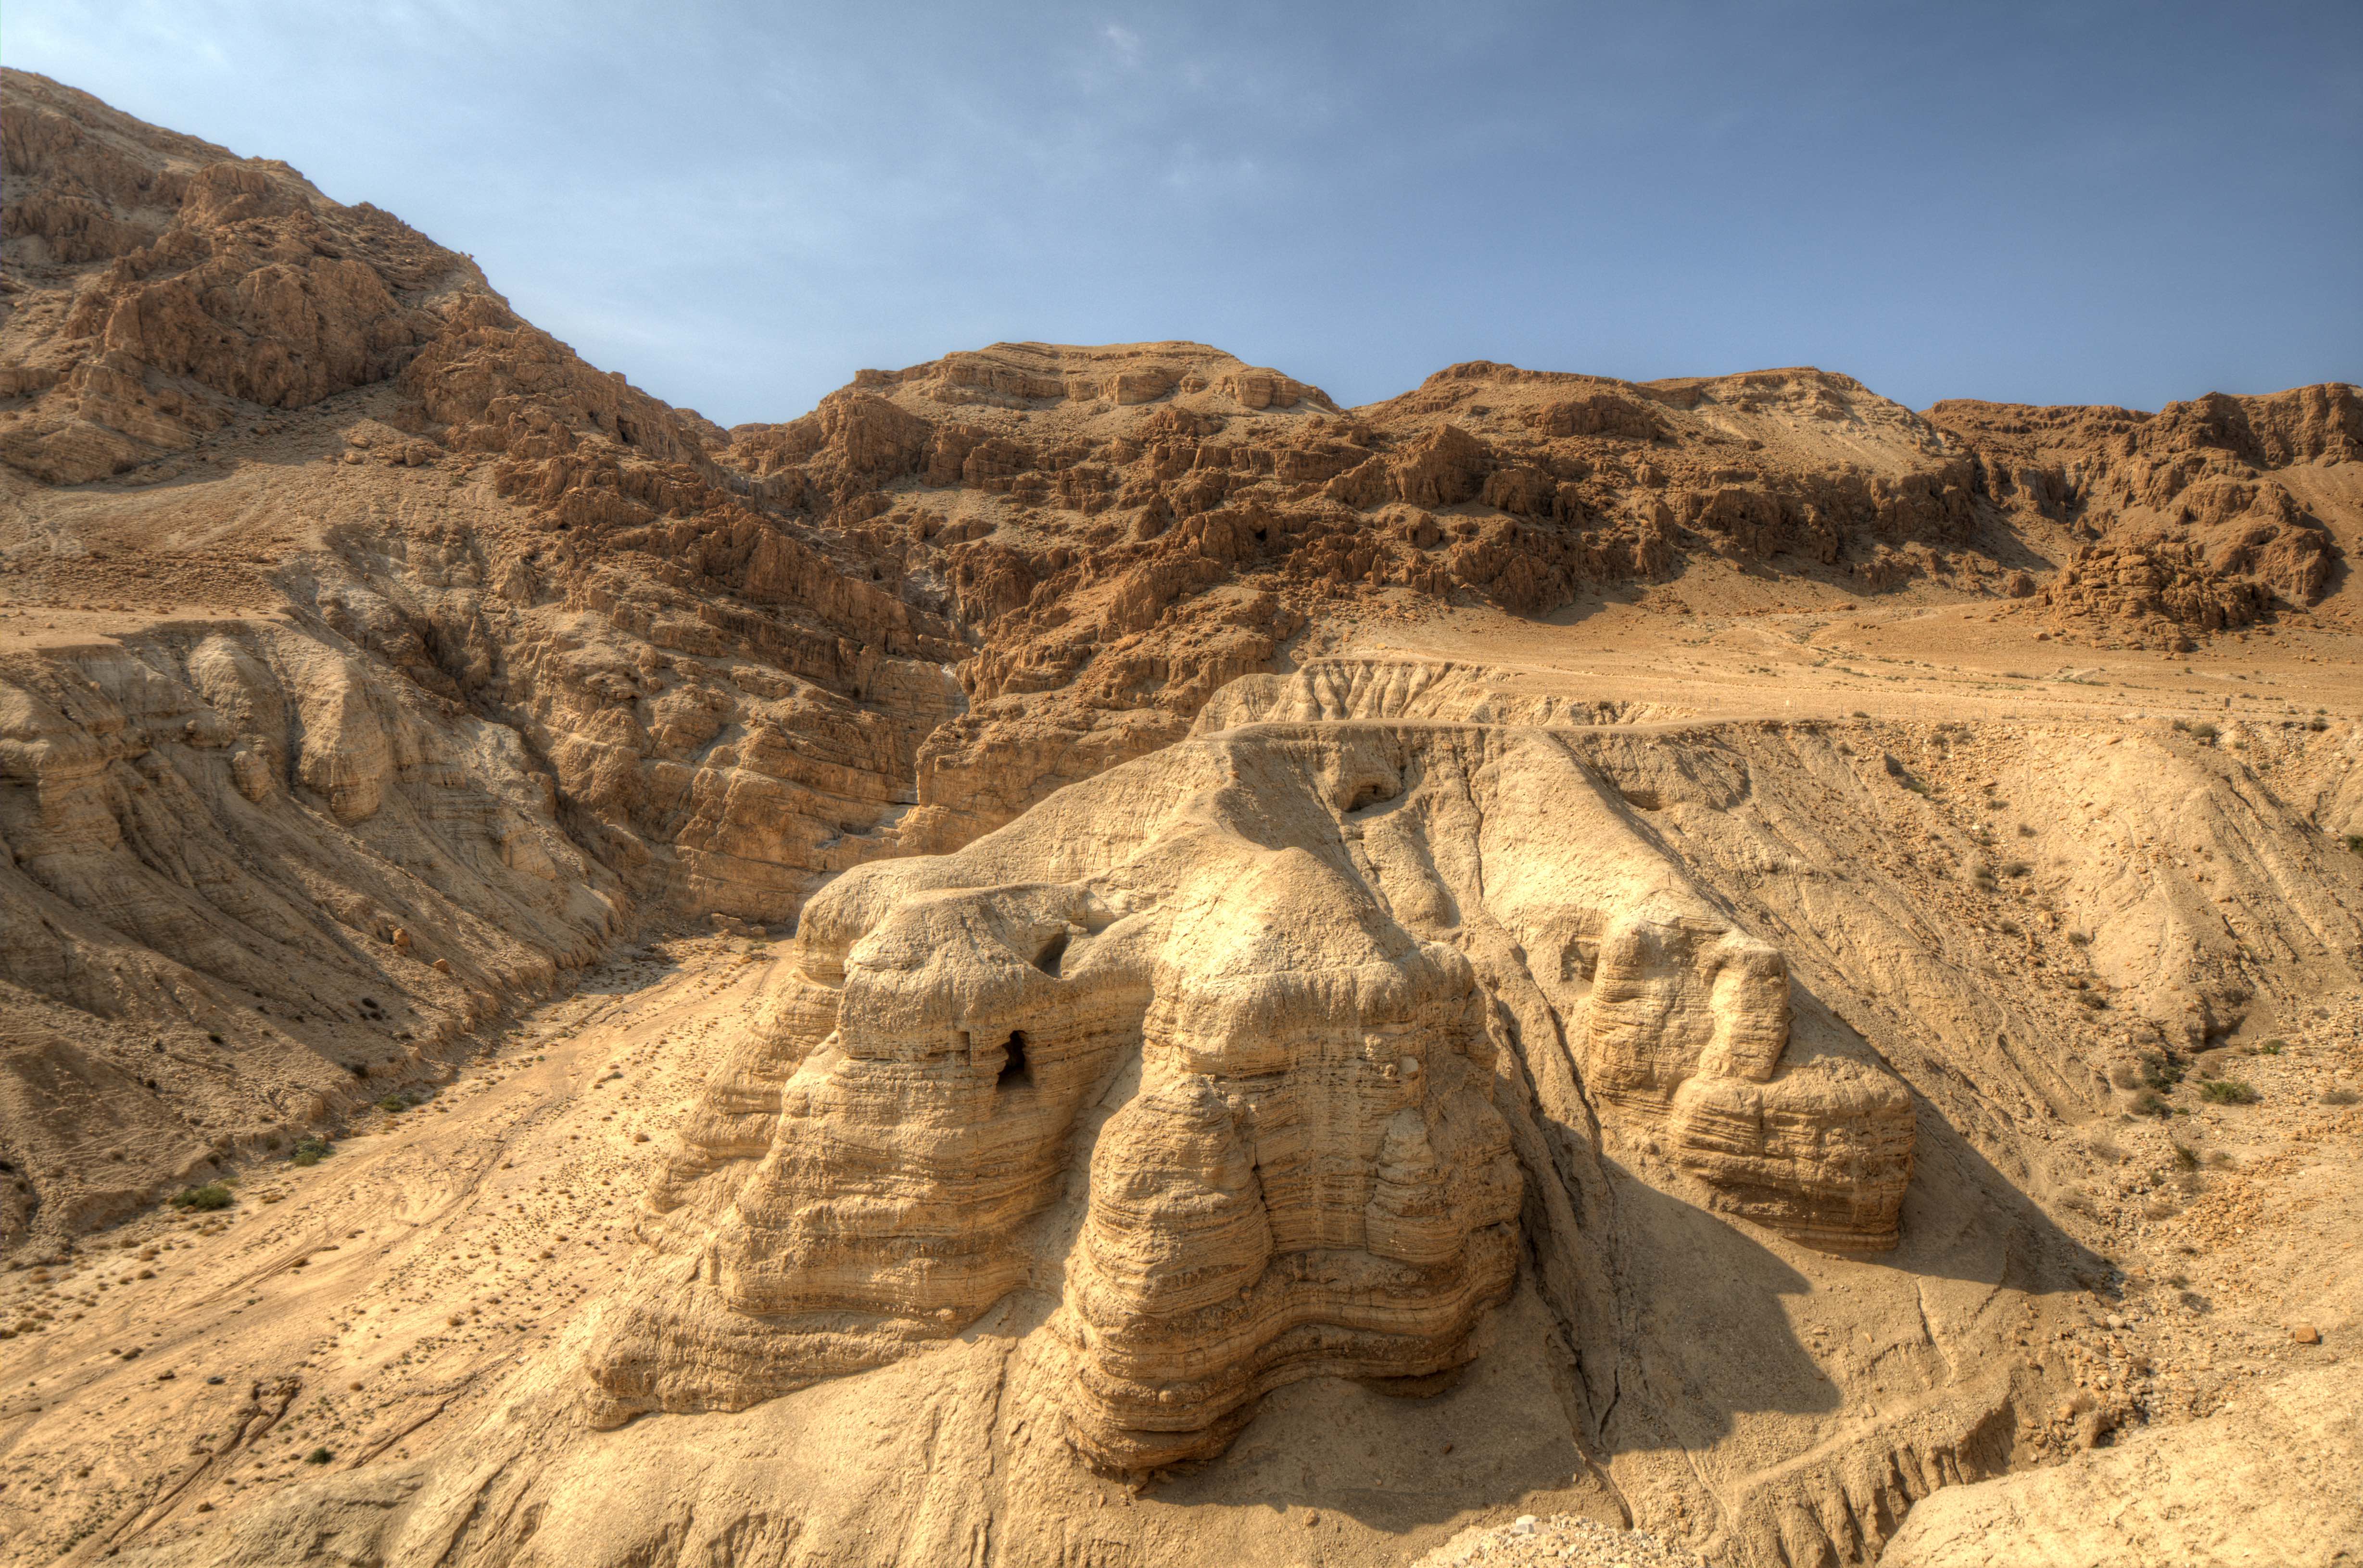 Wide shot of the sandy desert caves where the Dead Sea Scrolls were discovered